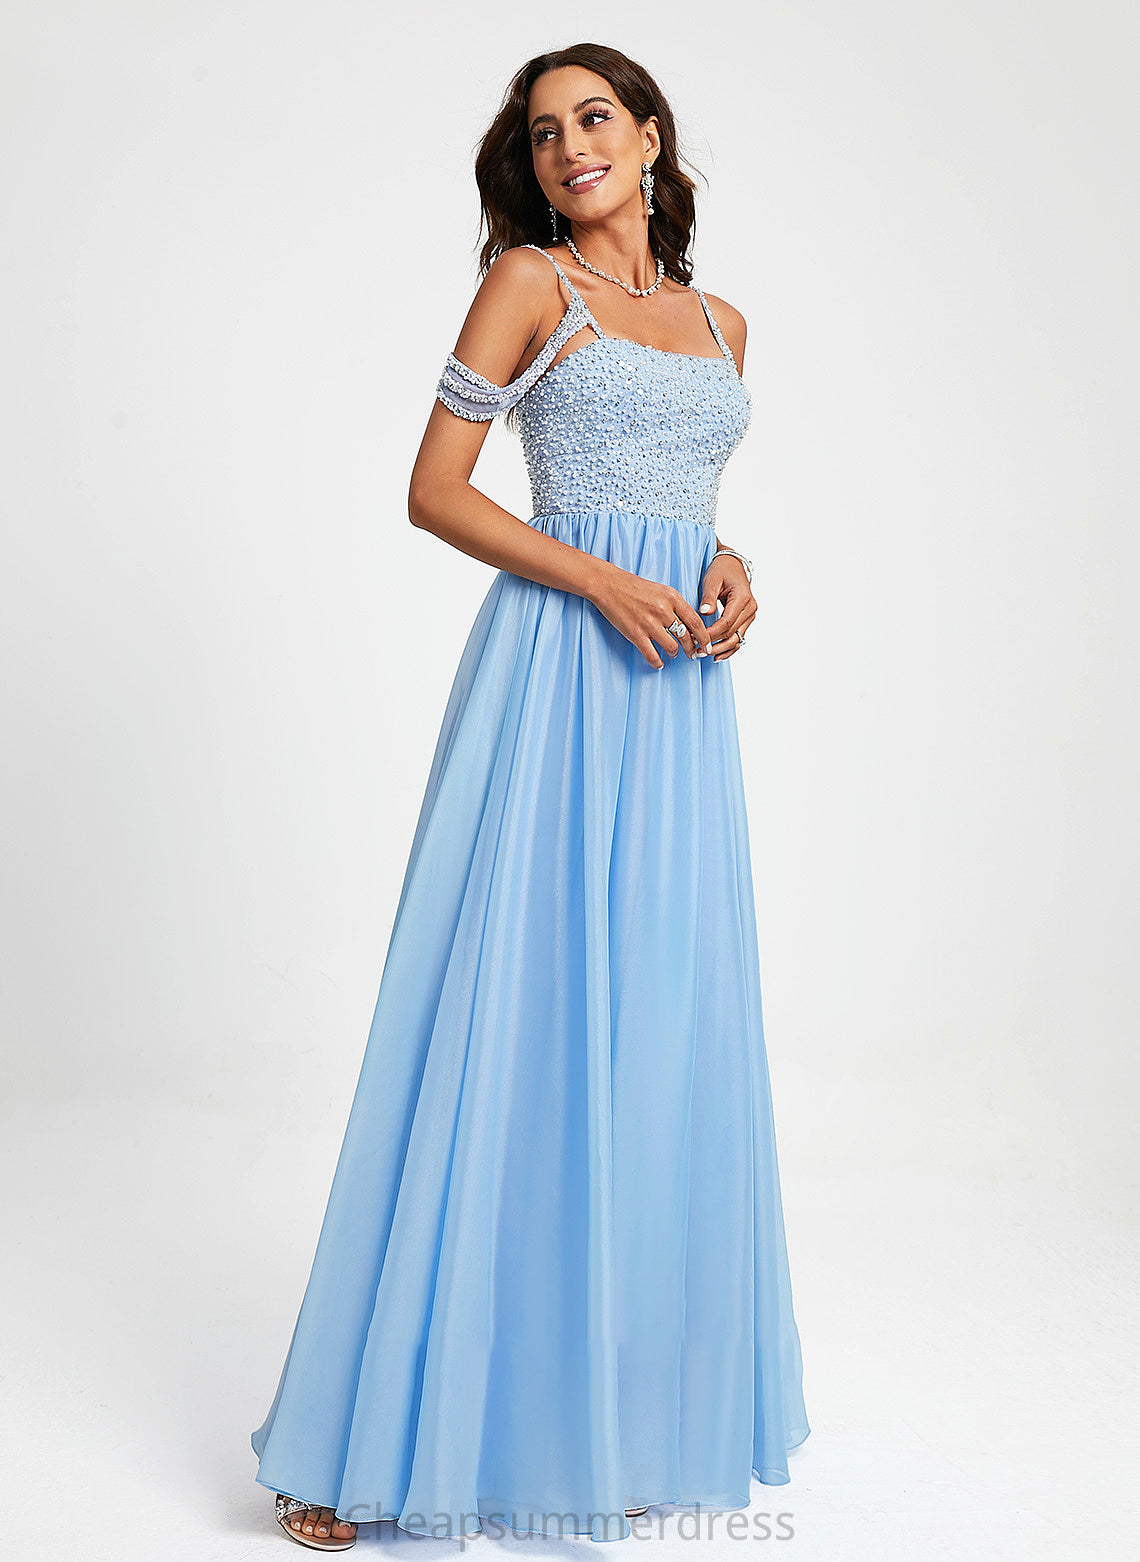 Ball-Gown/Princess Sweetheart Floor-Length Prom Dresses With Sequins Organza Beading Katelynn